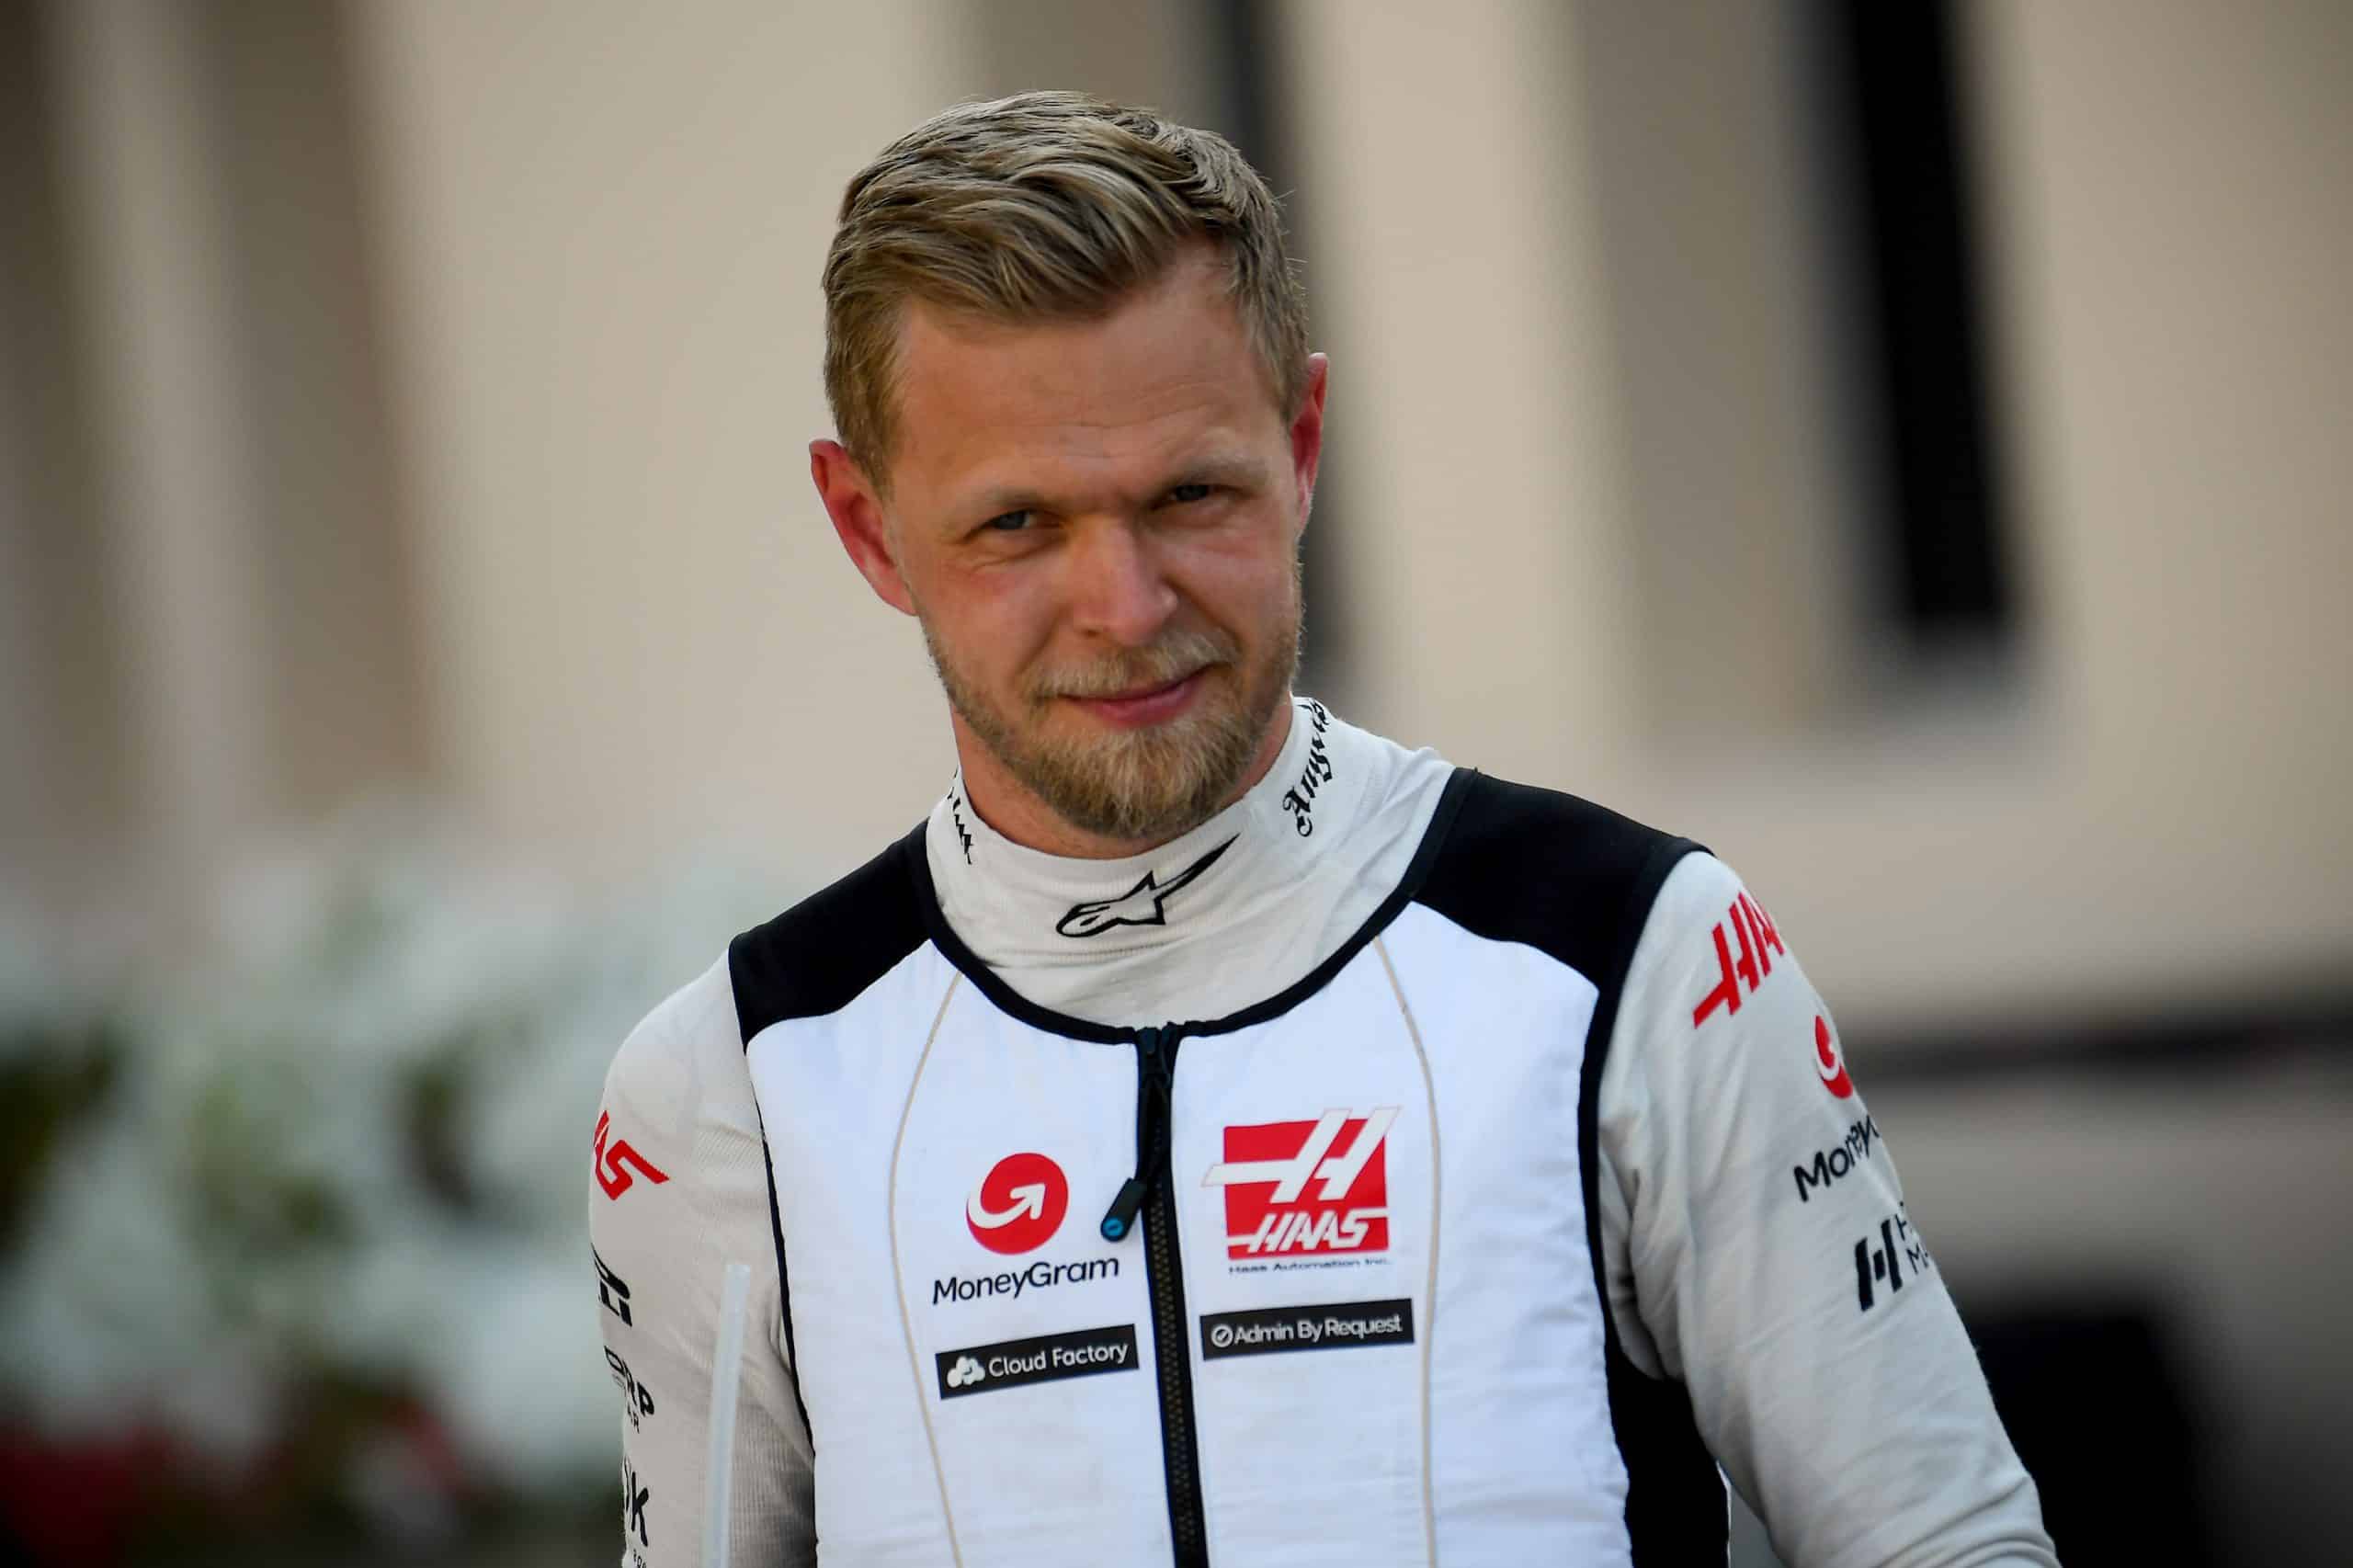 Admin by request-sponsored kevin magnussen in the paddock at the abu dhabi grand prix » admin by request » admin by request